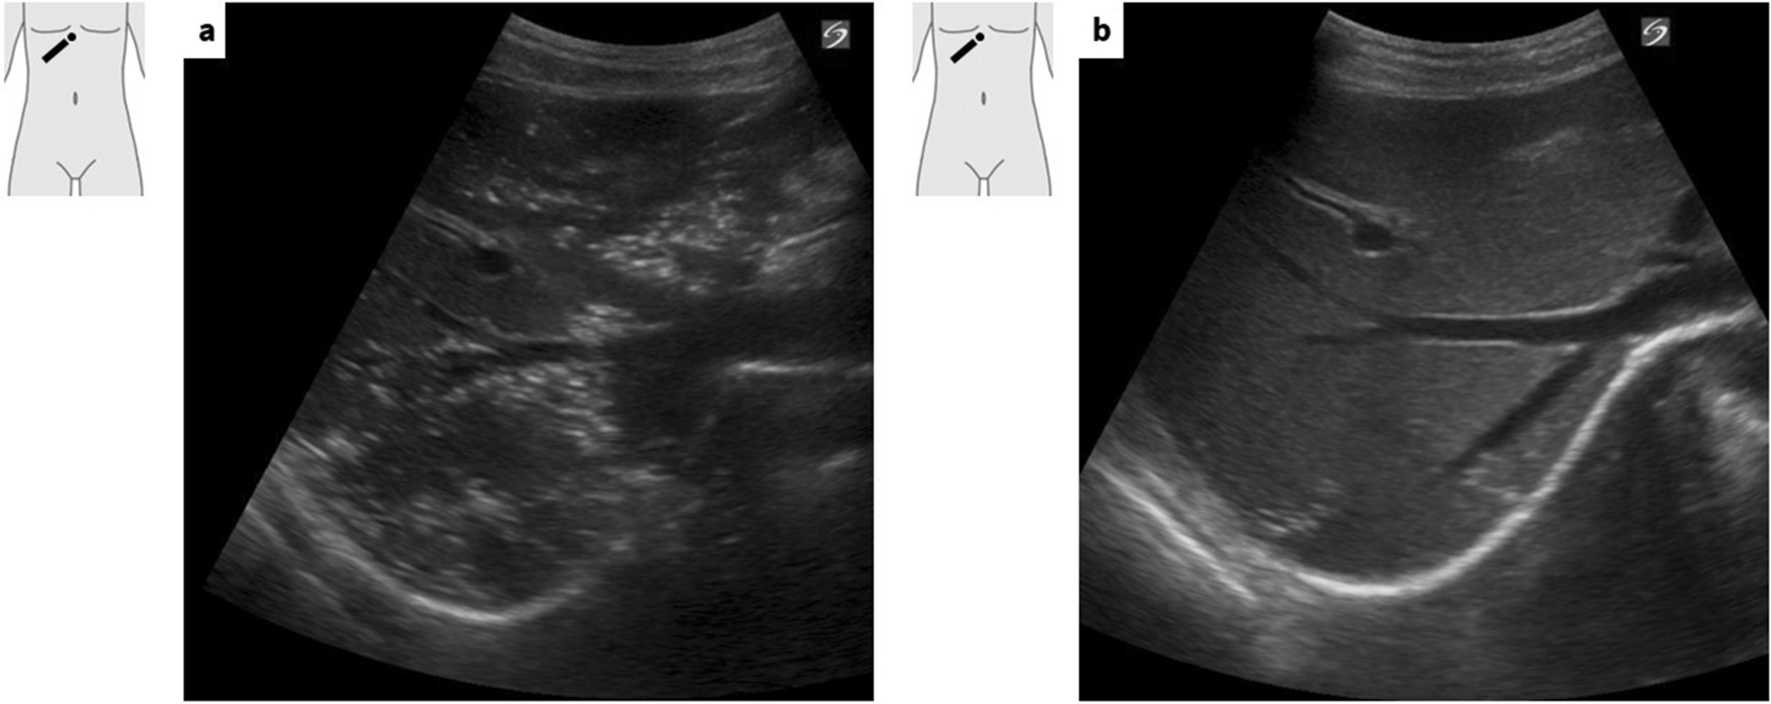 A case of portal vein gas due to accidental ingestion of hydrogen peroxide: the importance of performing ultrasound examinations over time